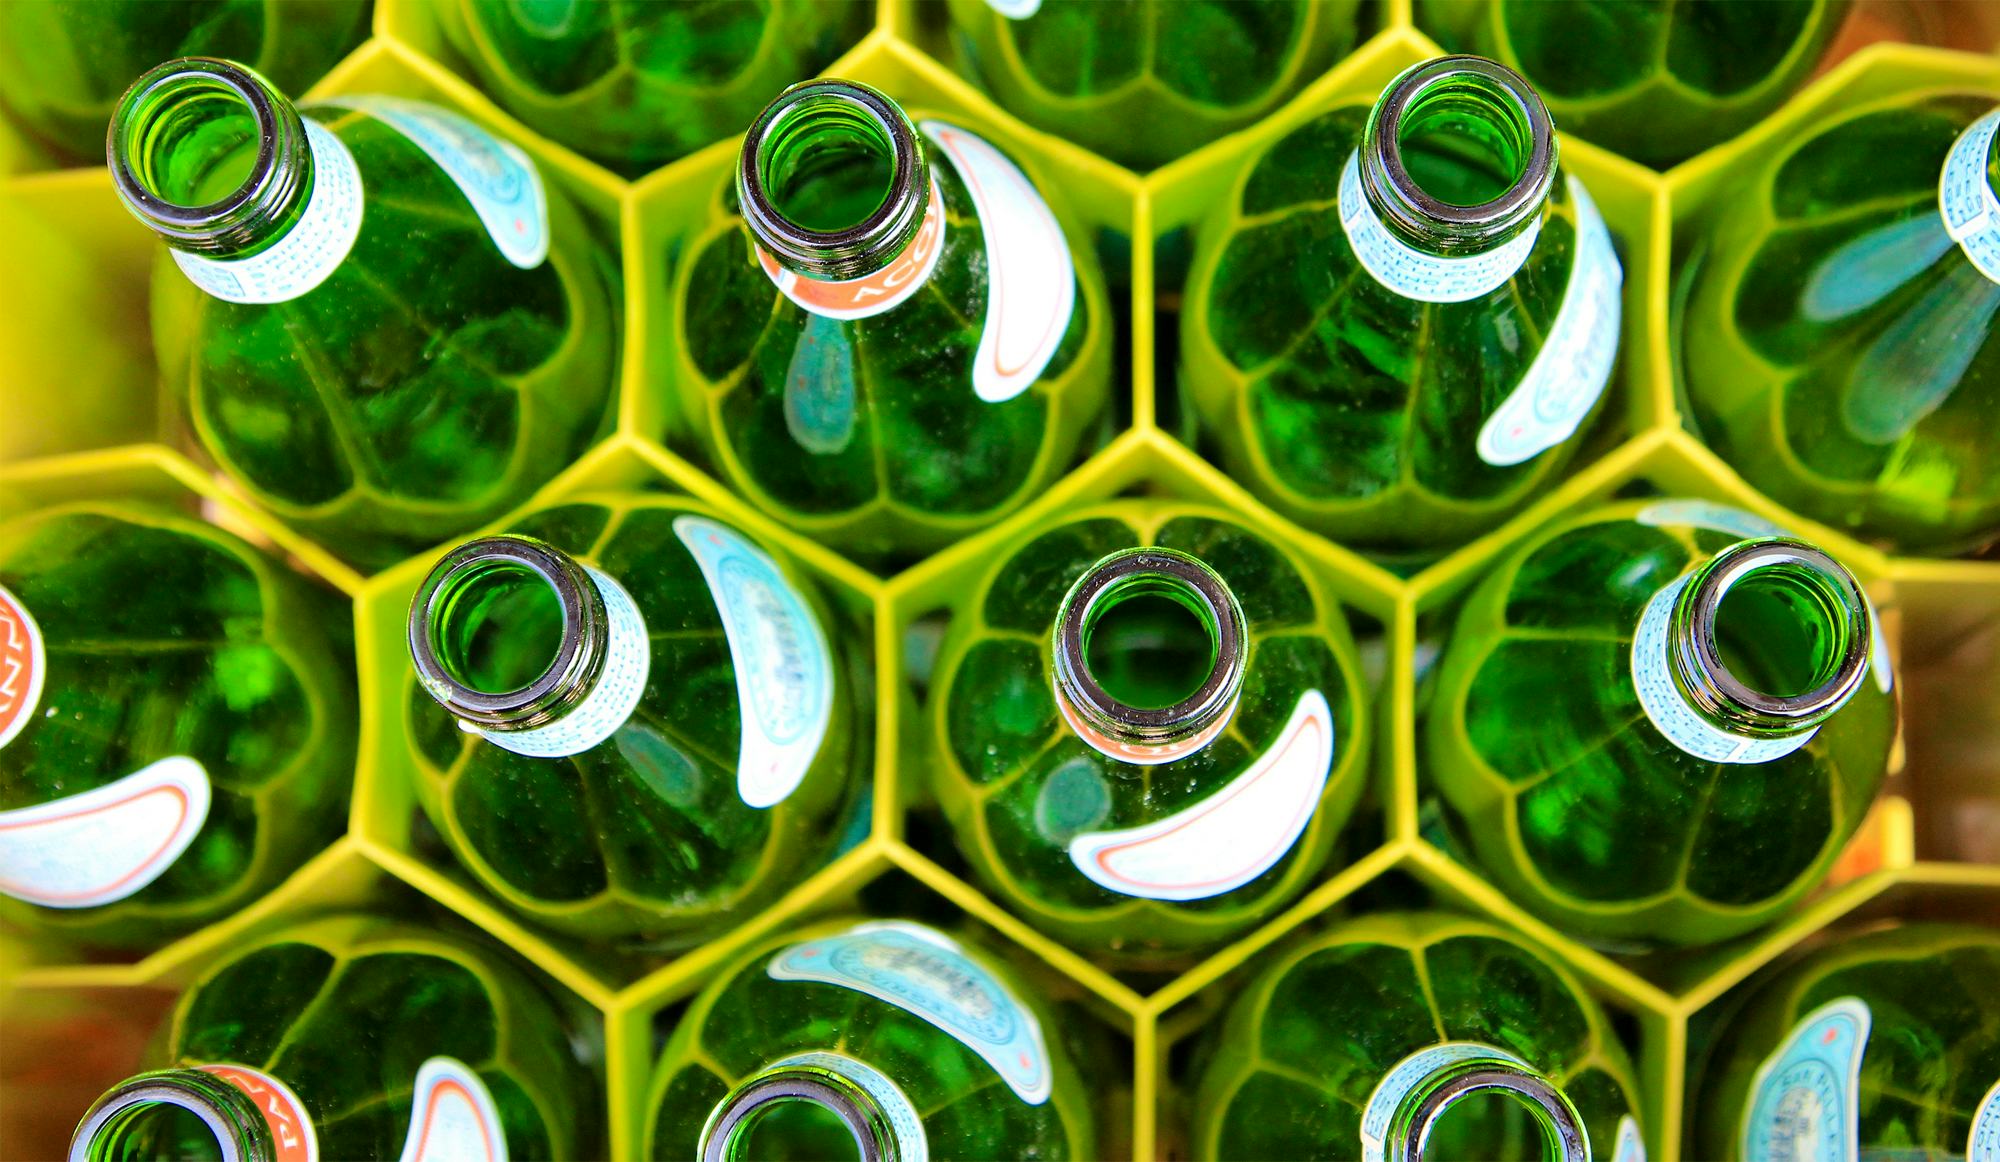 How the events industry is tackling the plastic problem glass bottles recycle credti lacey williams unsplash